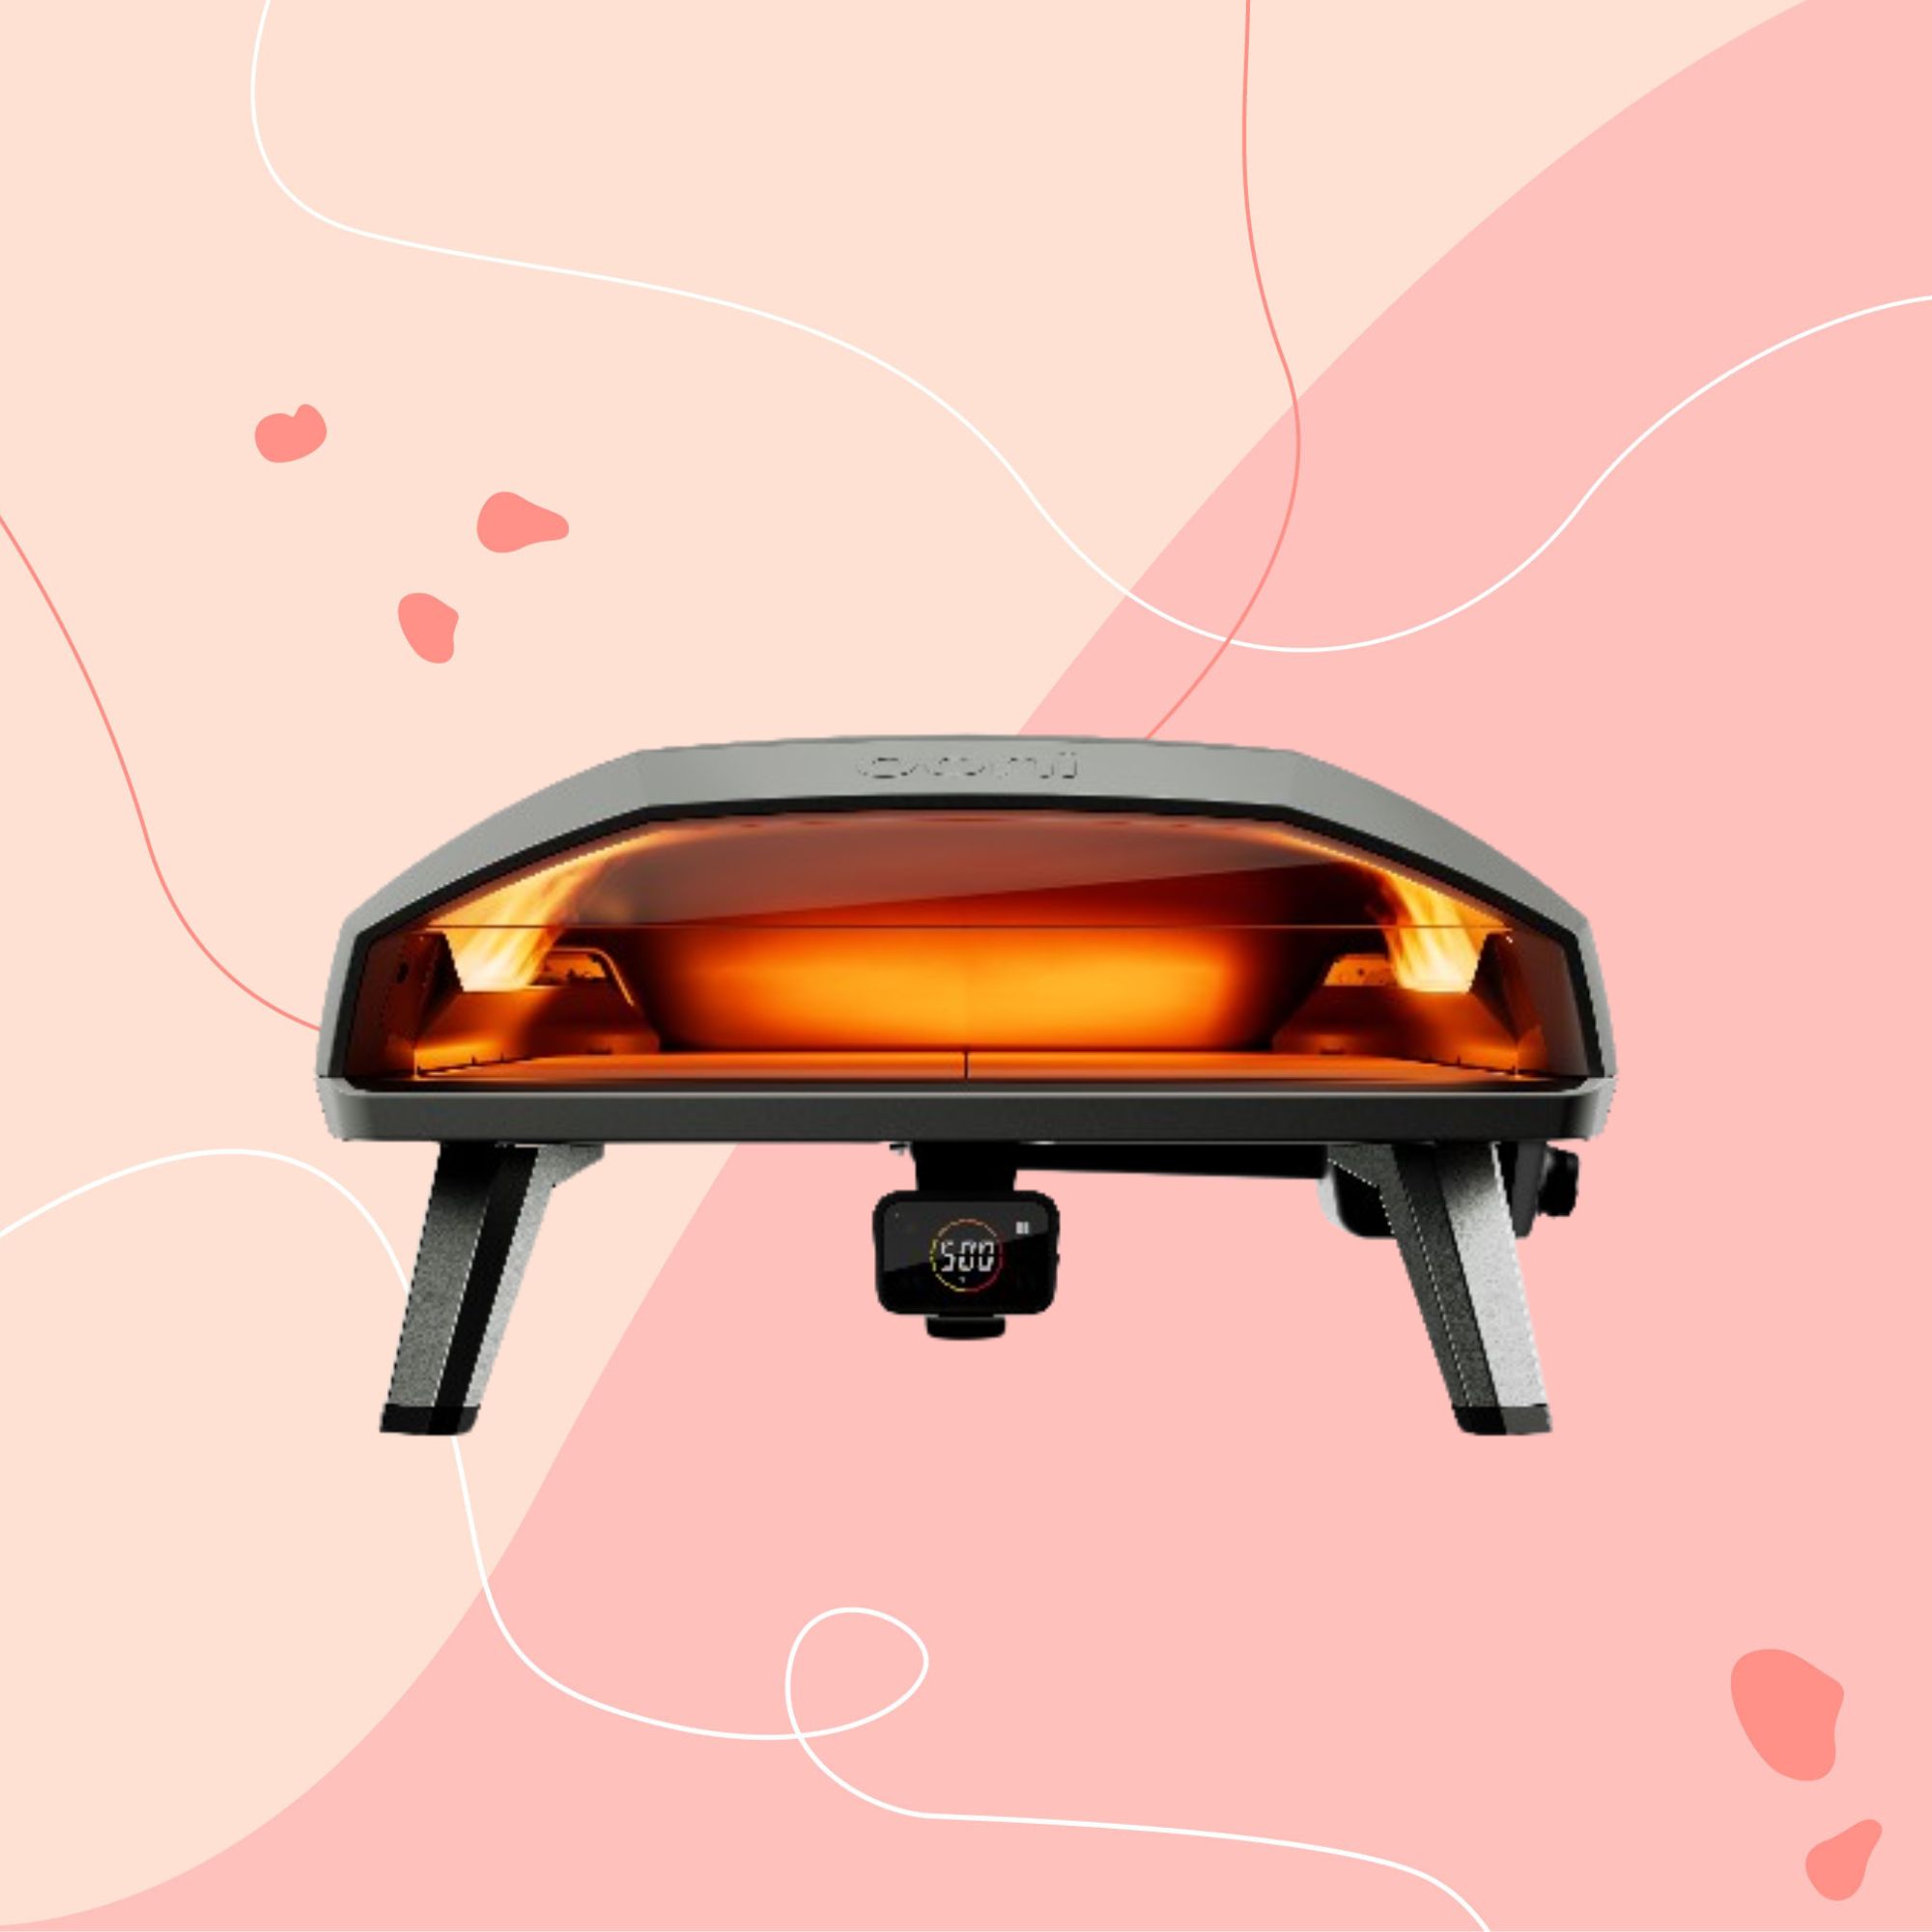 Ooni new pizza oven